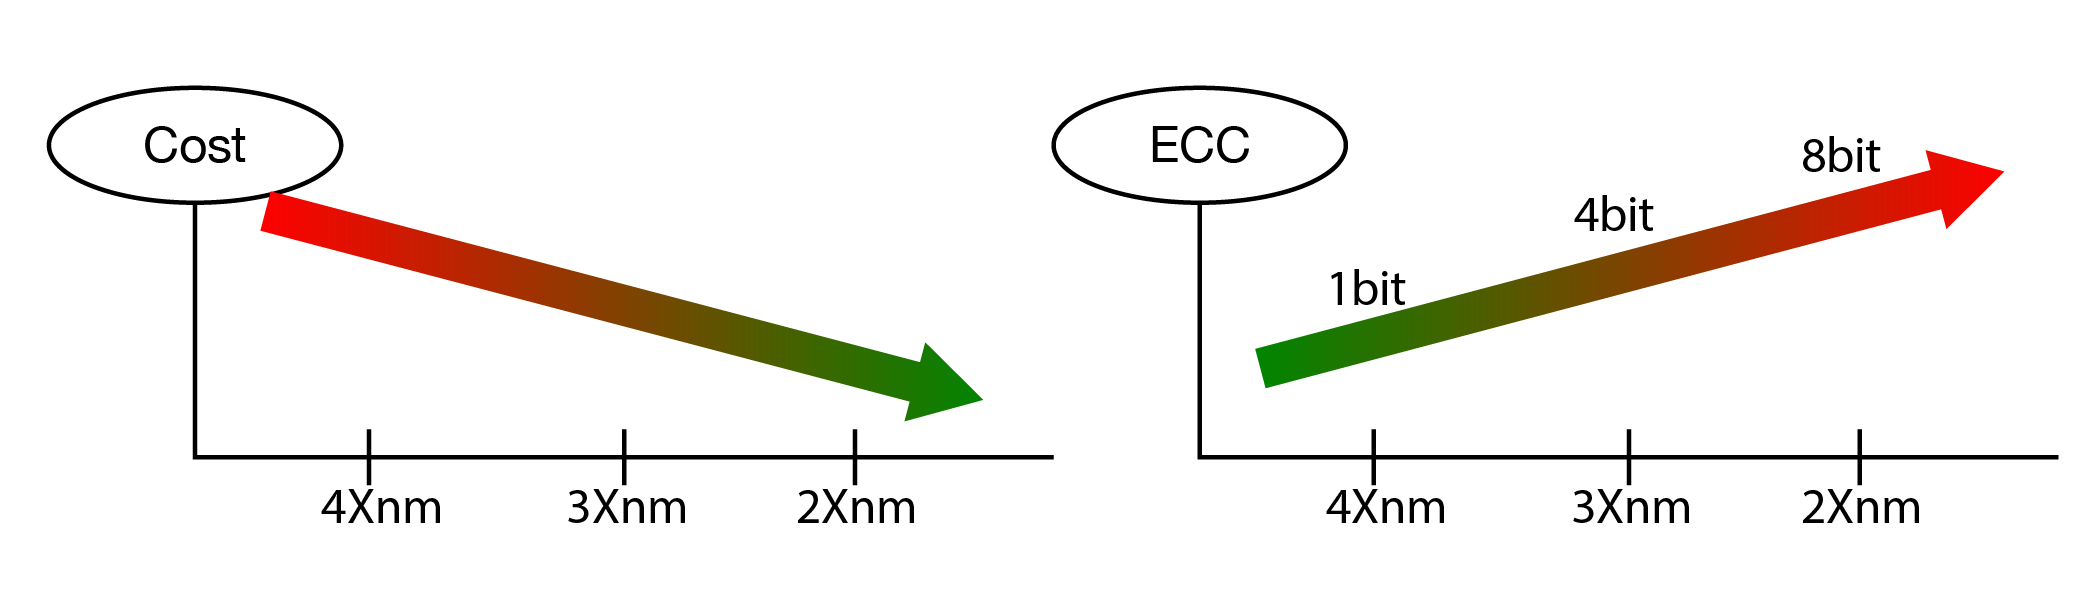 Figure 2 - BENAND offloads responsibility for ECC, and is compatible with the common NAND interface